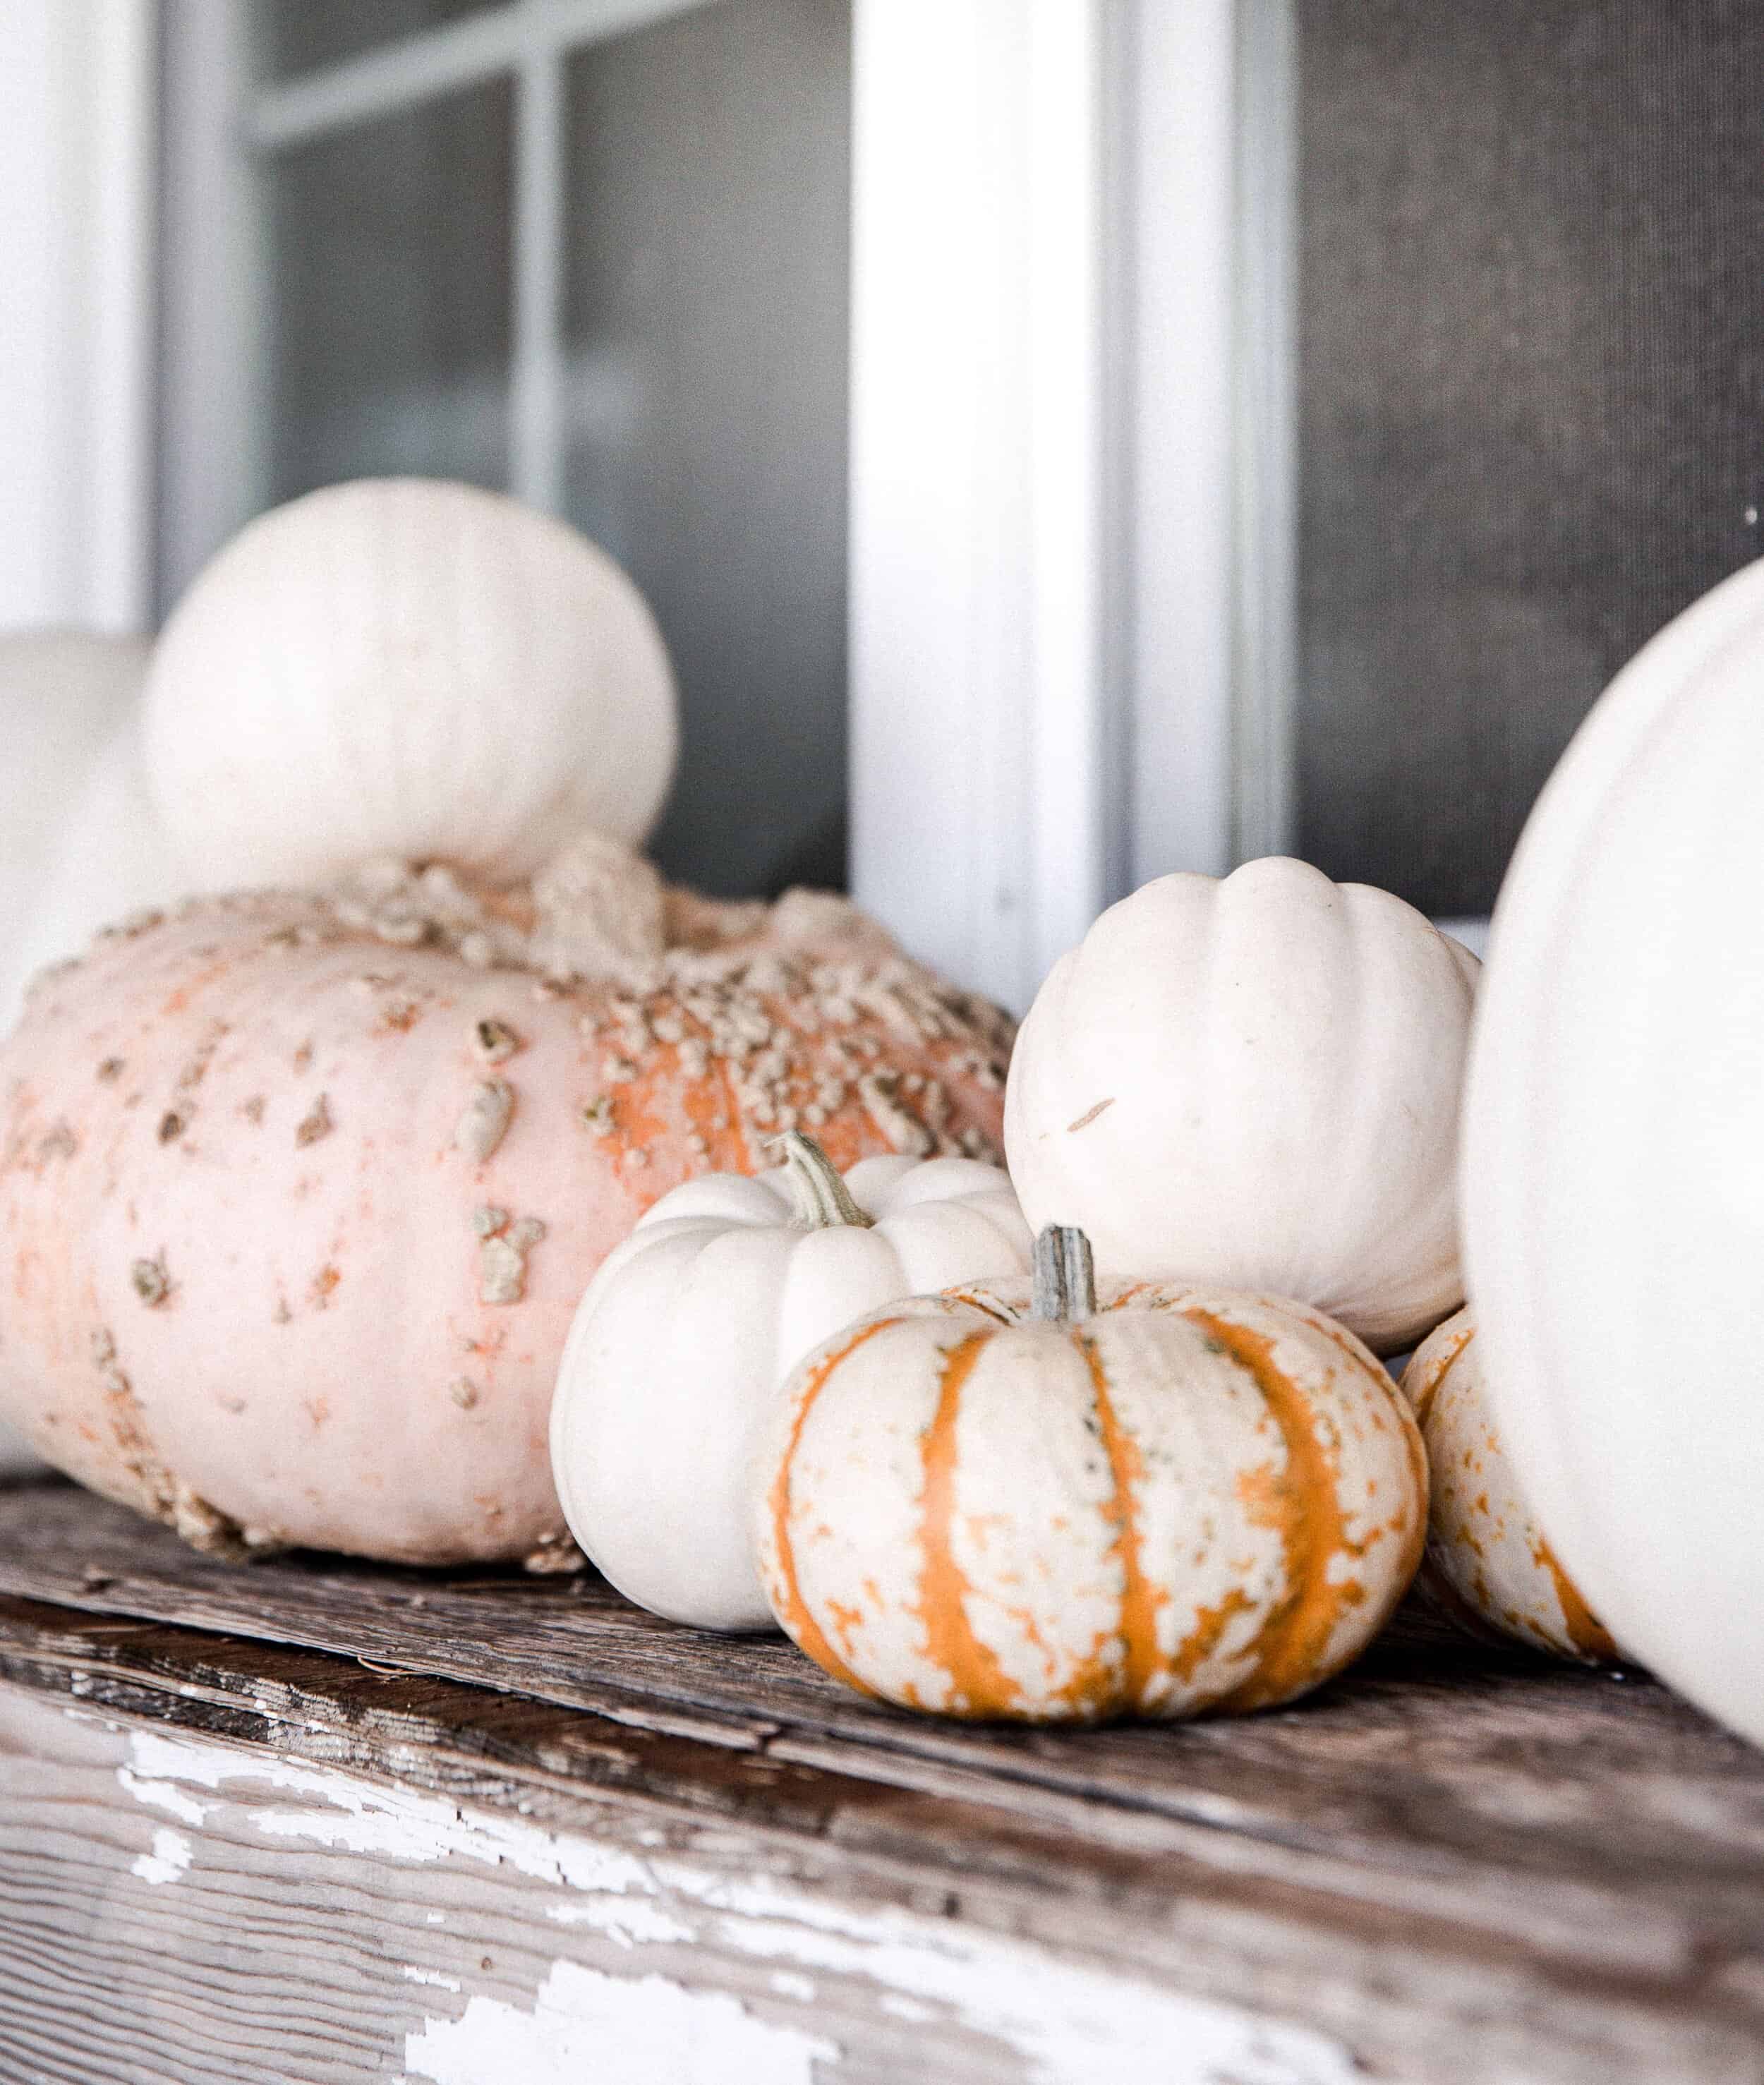 Fall is officially here, so it’s safe to break out that fall porch decor! Get inspired to decorate for fall with these simple decorating ideas! 